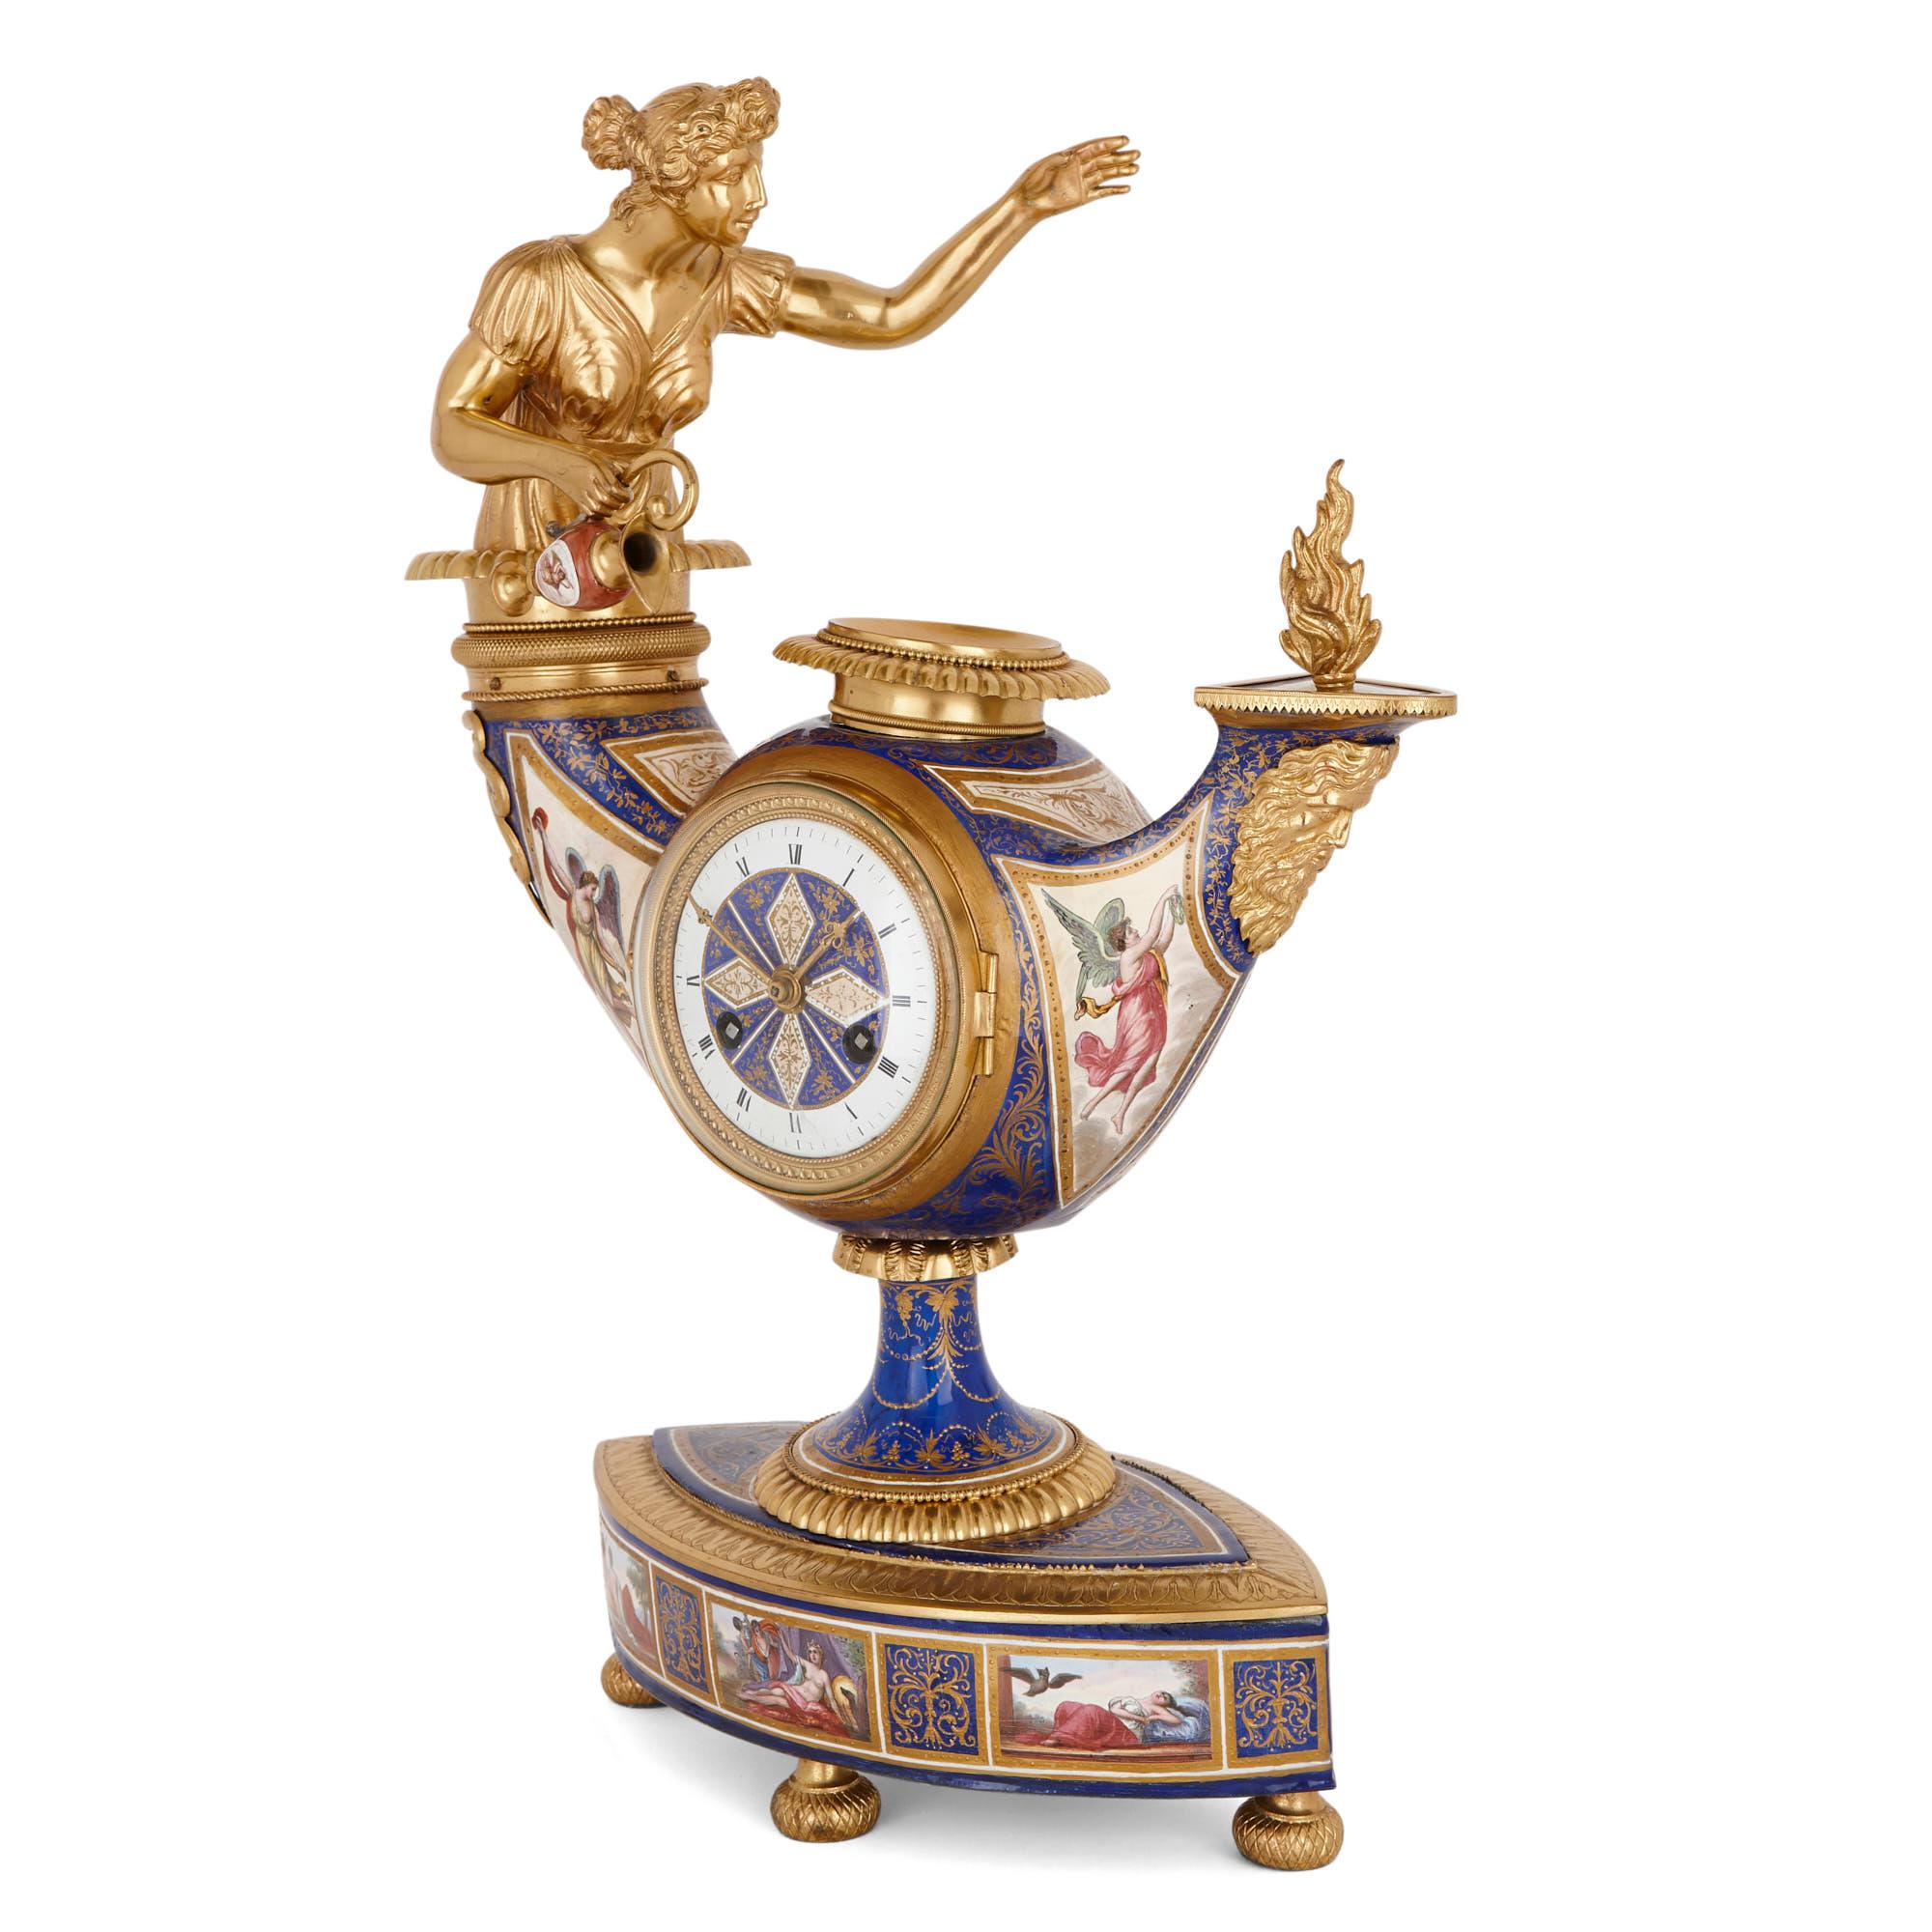 This magnificent silver-gilt and enamel lamp-form clock was produced in Vienna in circa 1870. The clock sits on a lozenge-shaped base, which is enamelled with panels depicting reclining figures interspersed with panels decorated with gold-coloured